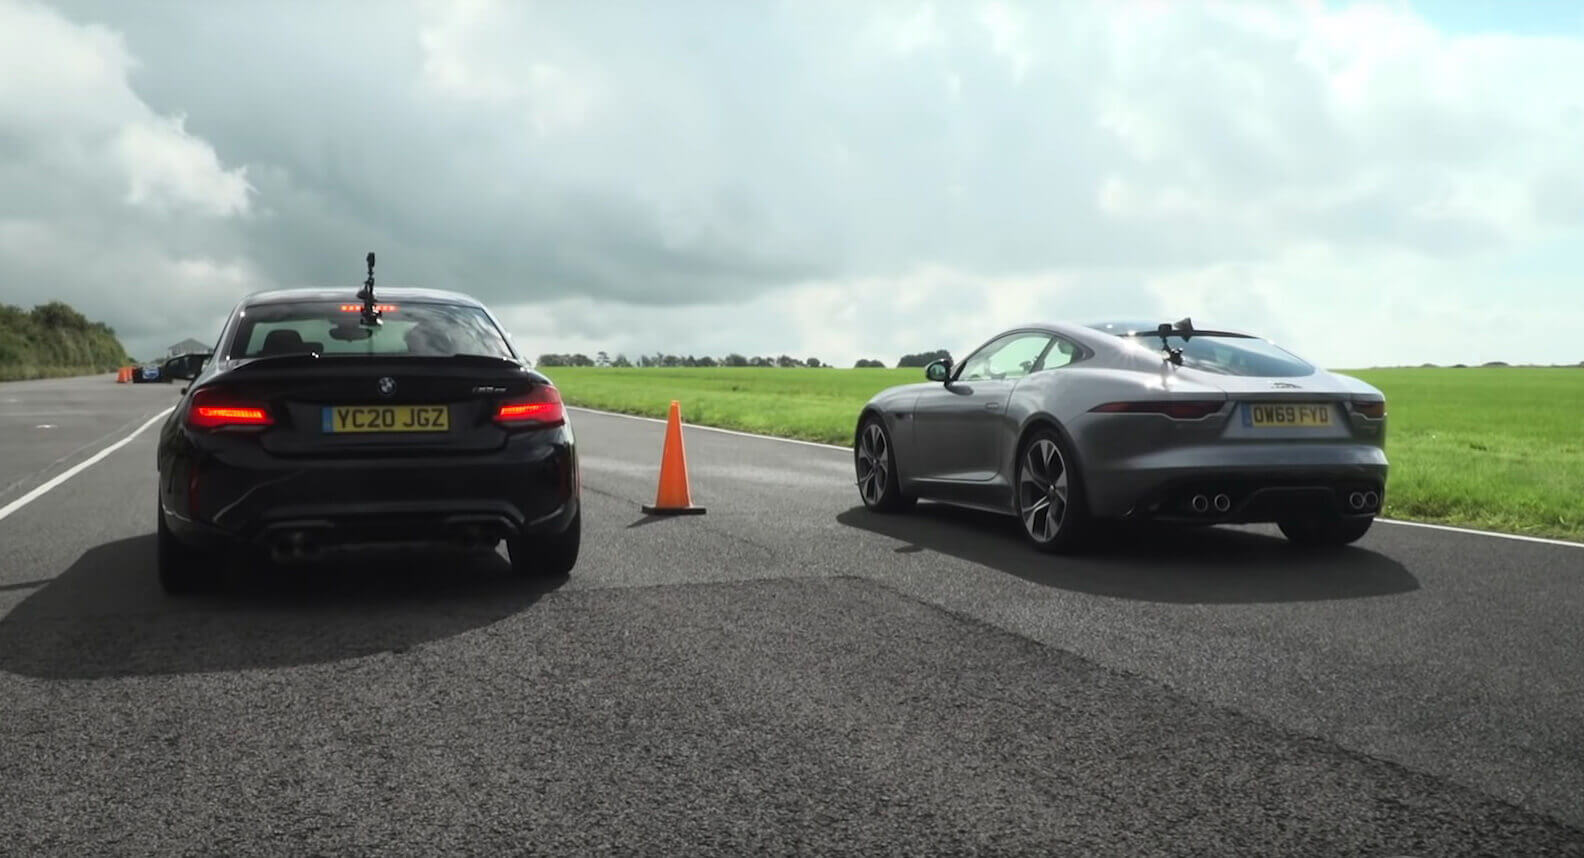 BMW M2 CS And Jaguar F-Type Are Two Unlikely Rivals